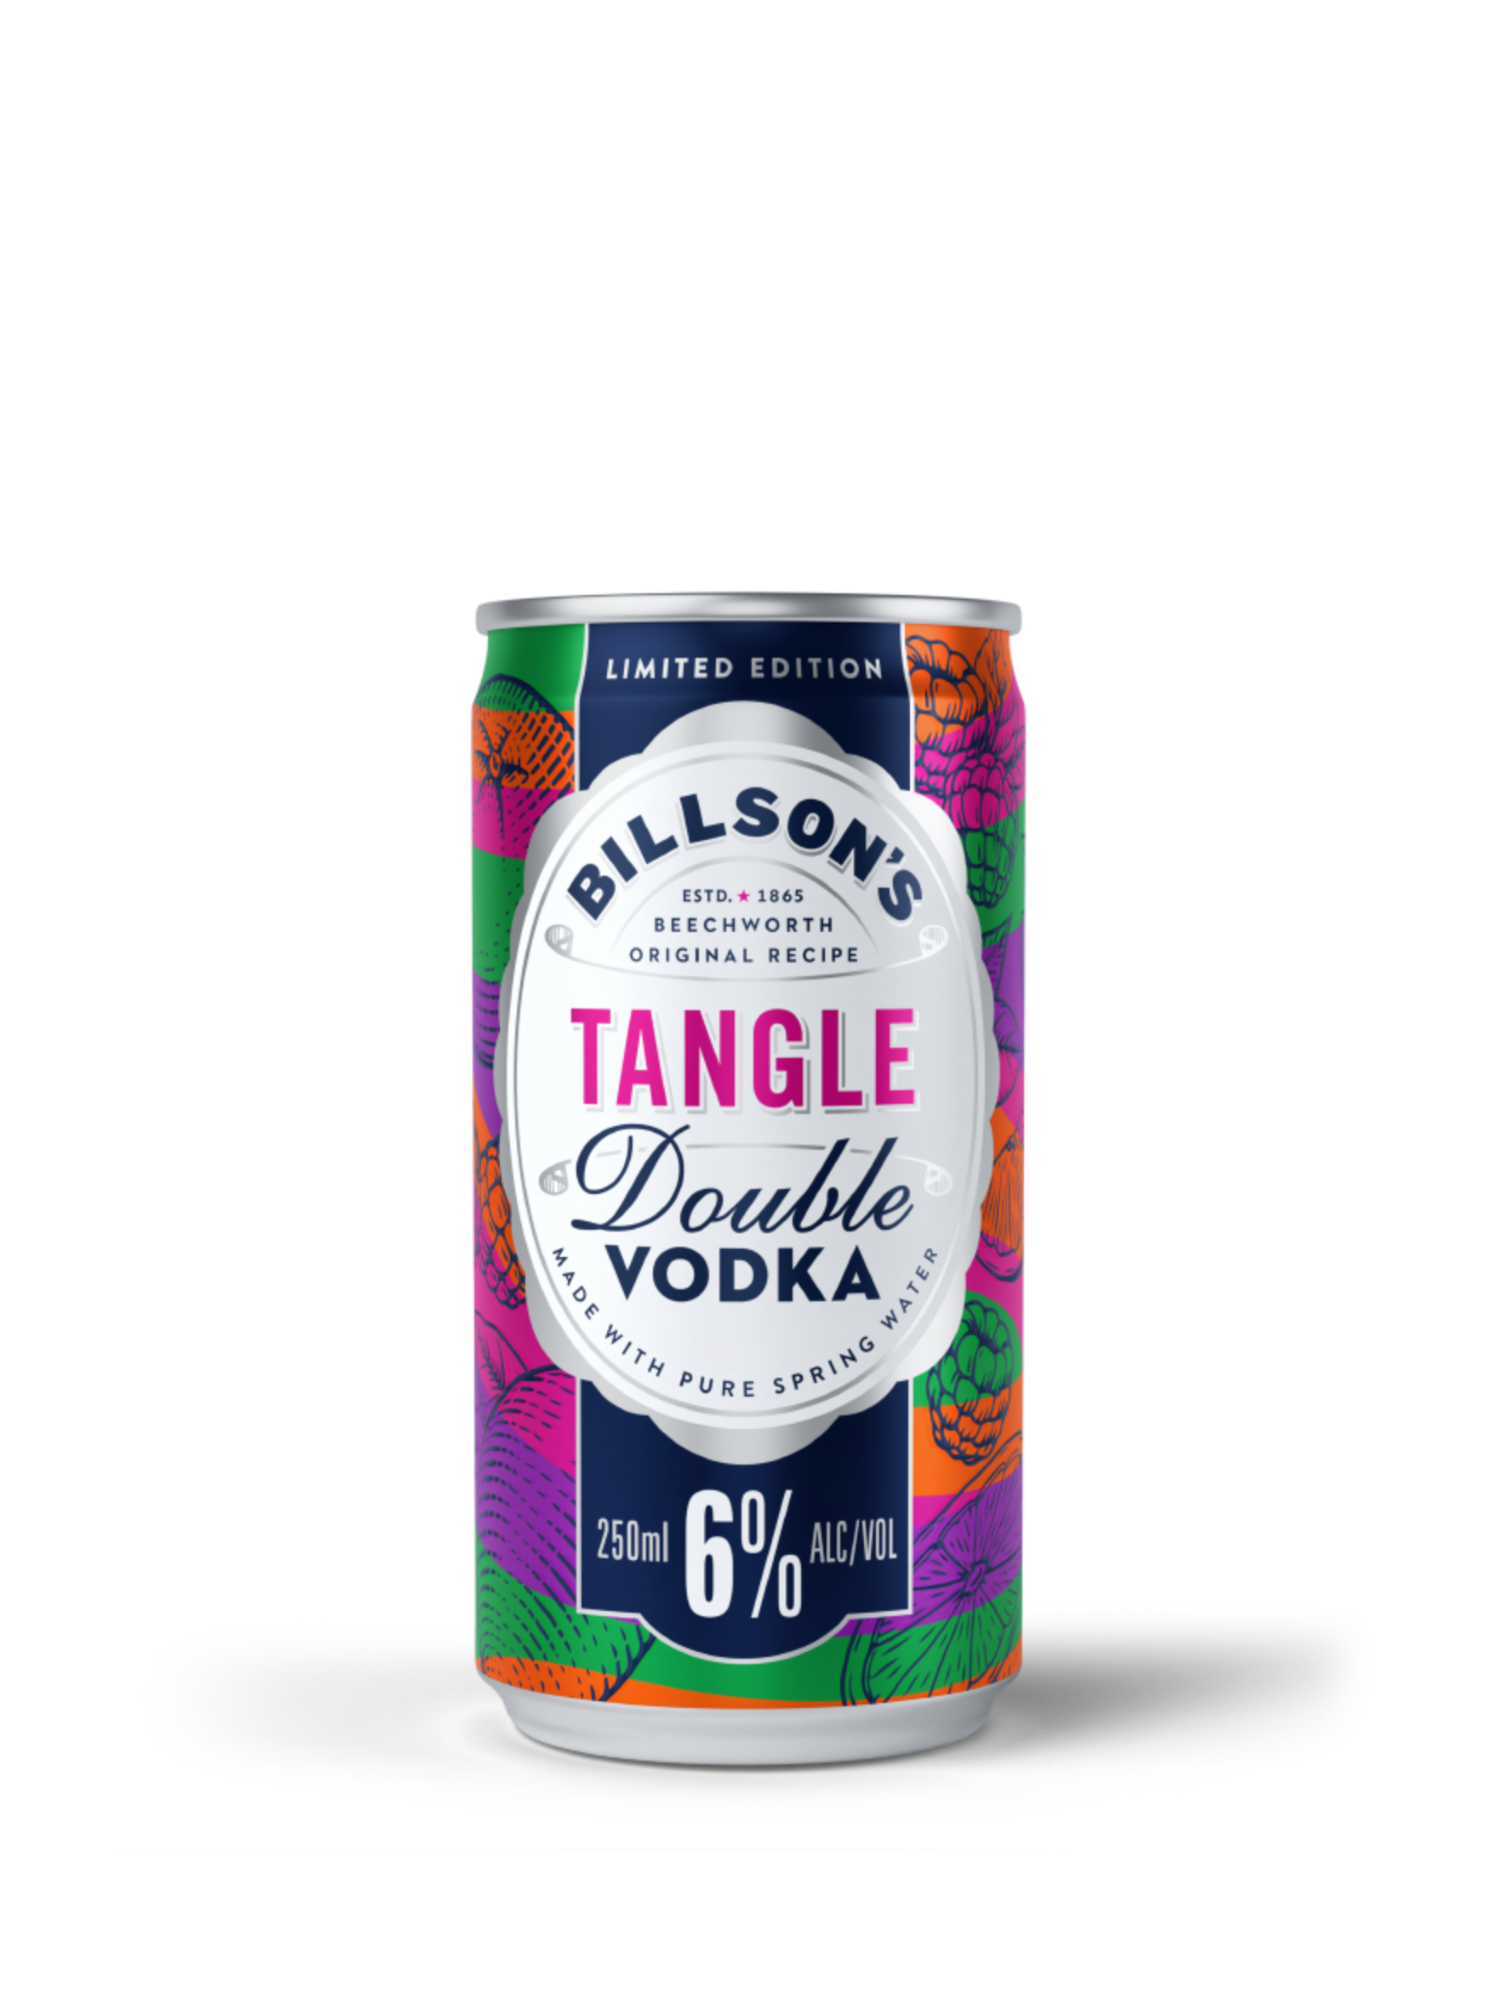 Billson's Double Vodka with Tangle